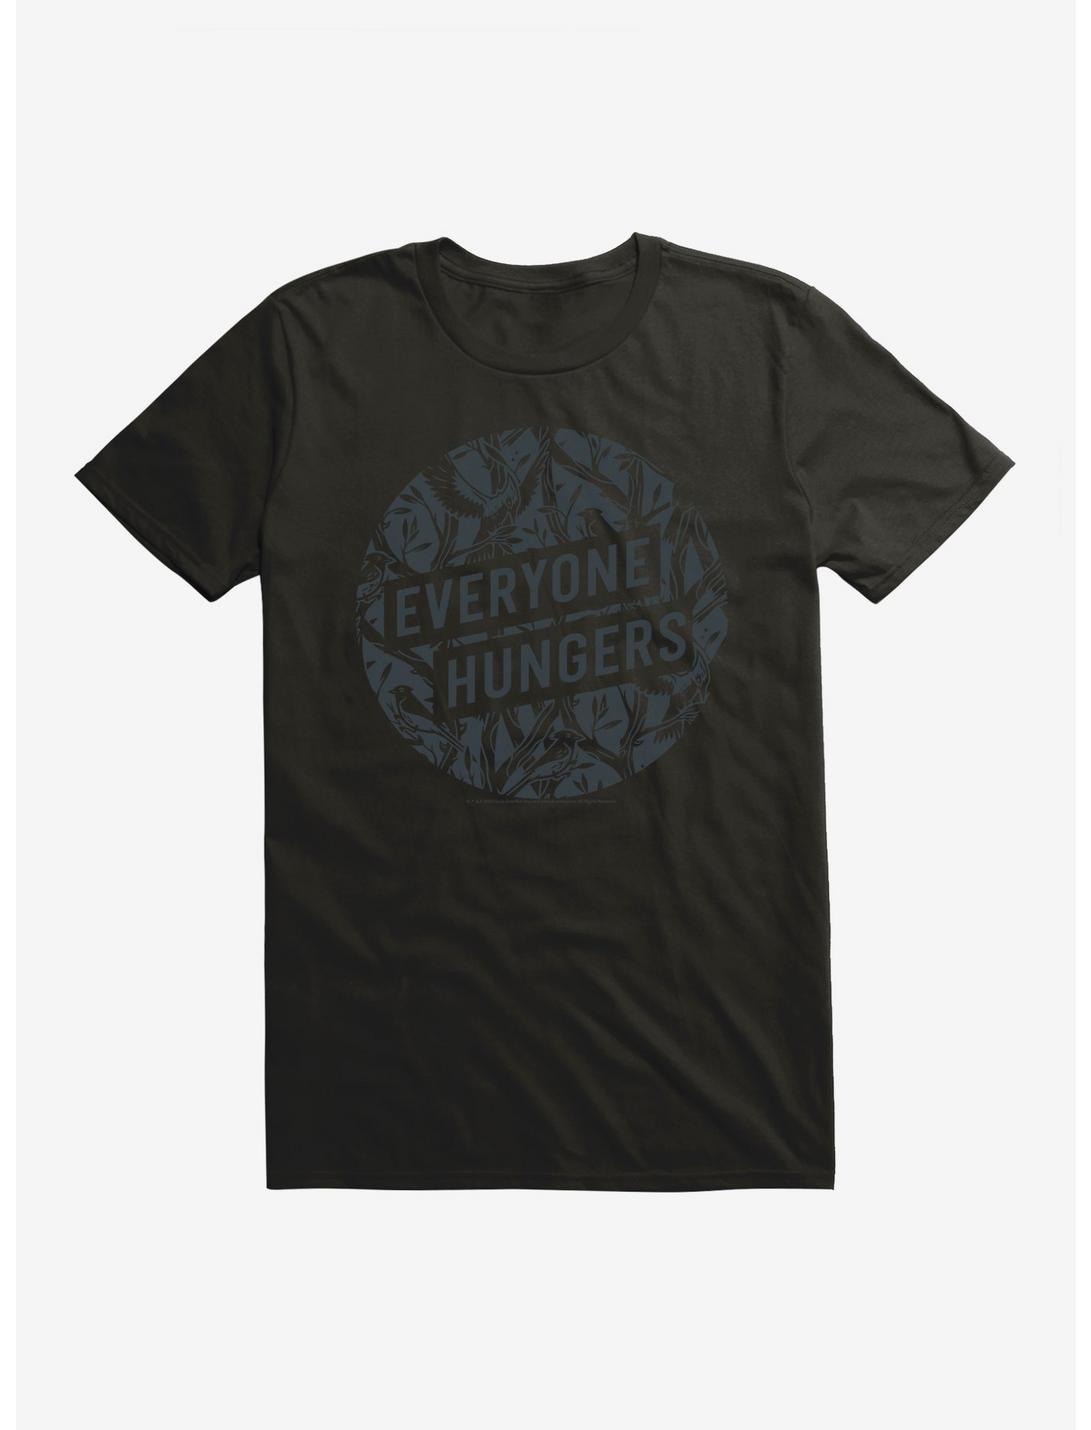 Hunger Games: The Ballad Of Songbirds And Snakes Everyone Hungers T-Shirt, , hi-res